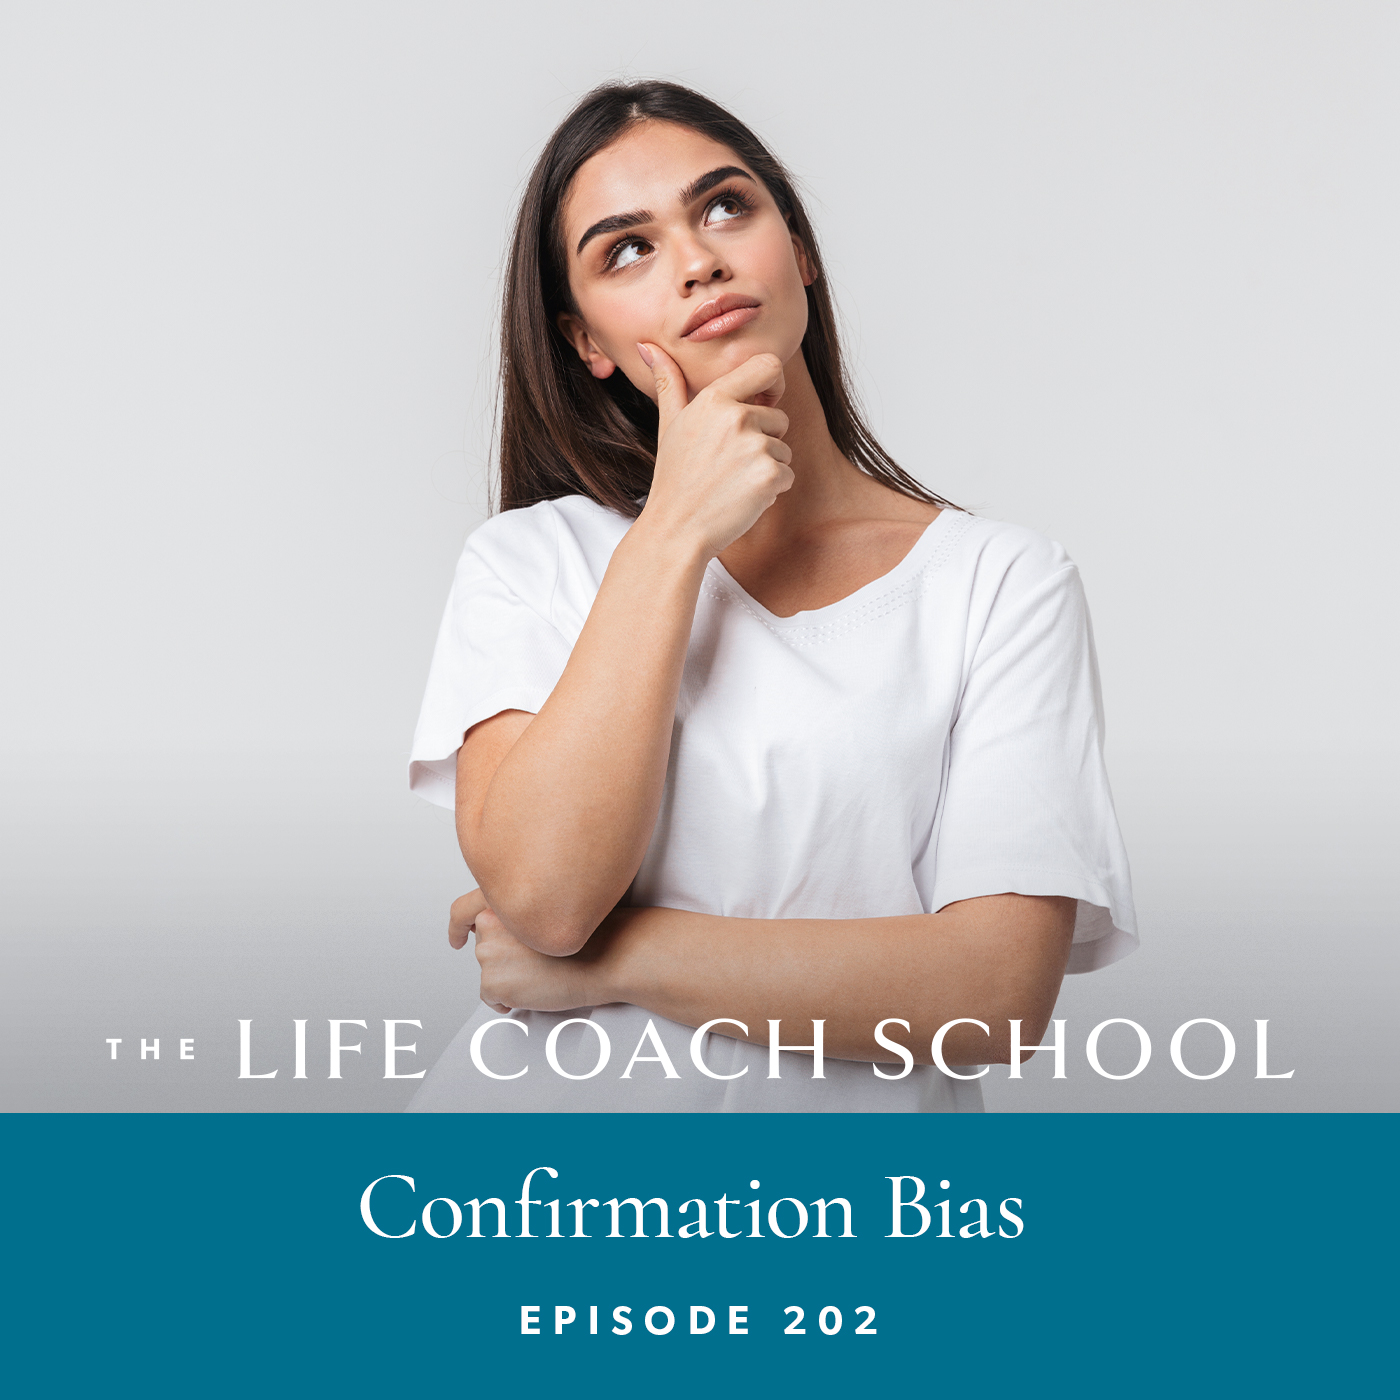 The Life Coach School Podcast with Brooke Castillo | Episode 202 | Confirmation Bias